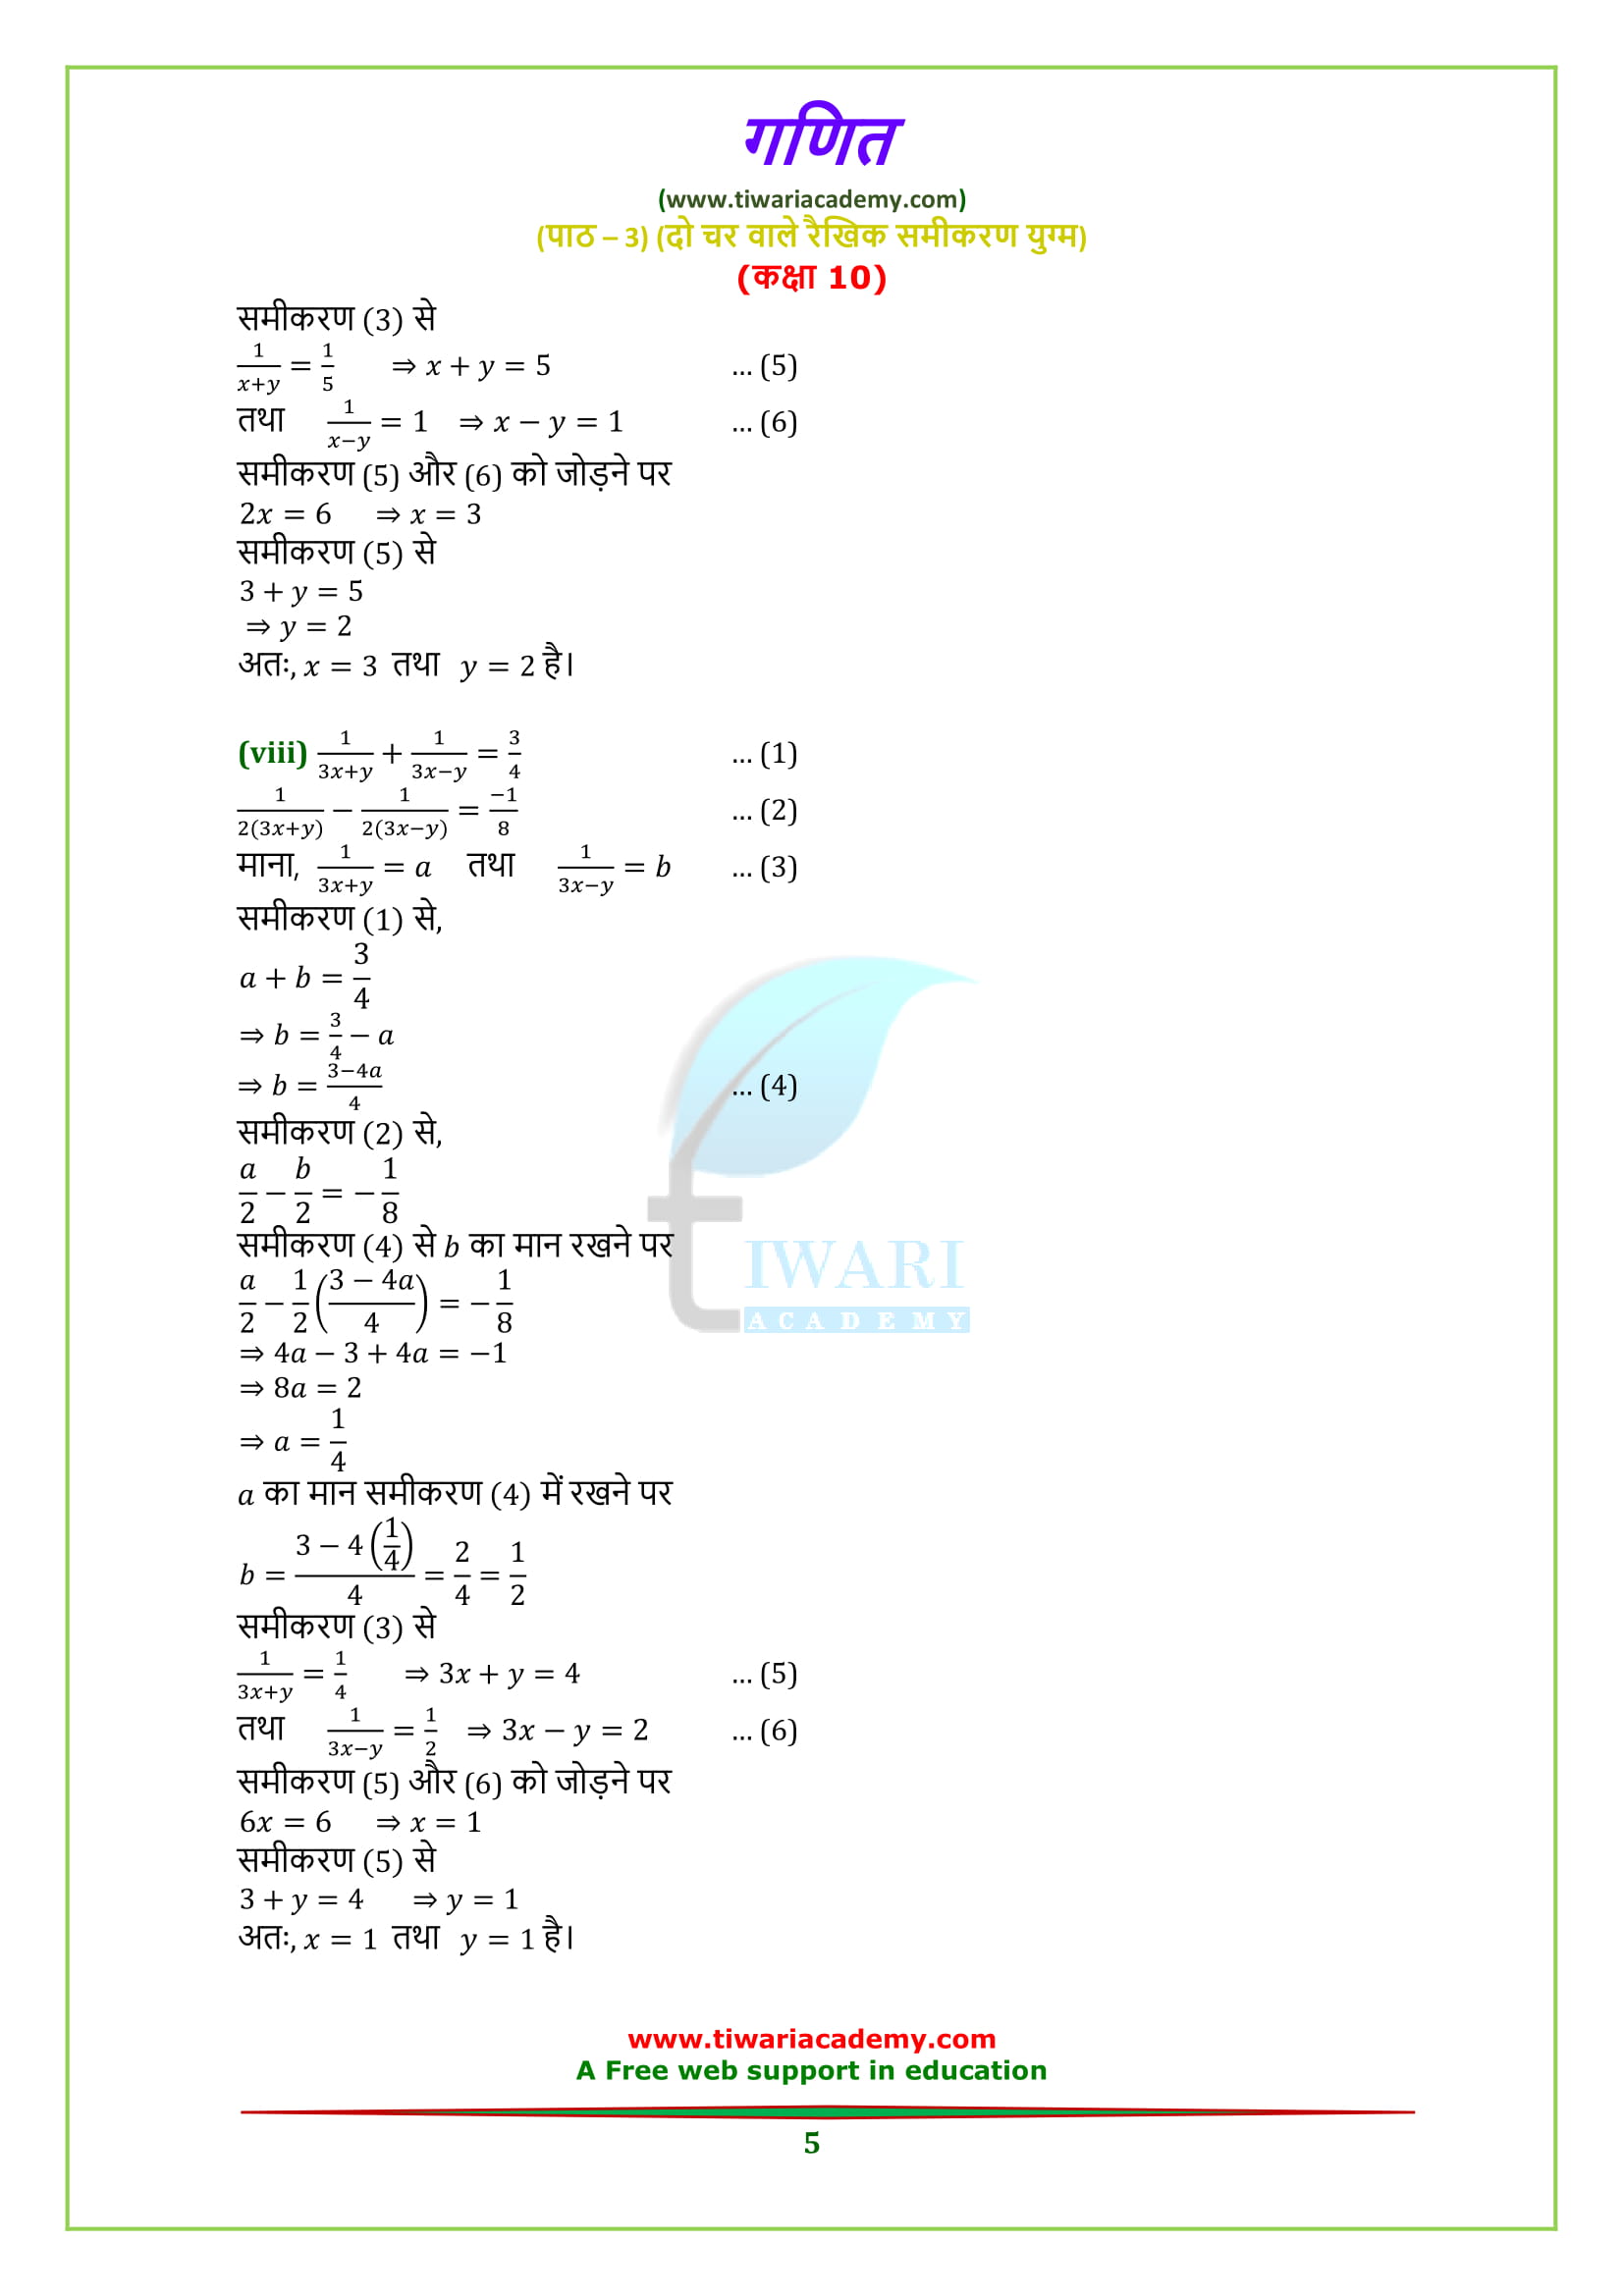 Class 10 maths chapter 3 exercise 3.6 solutions in Hindi question answers